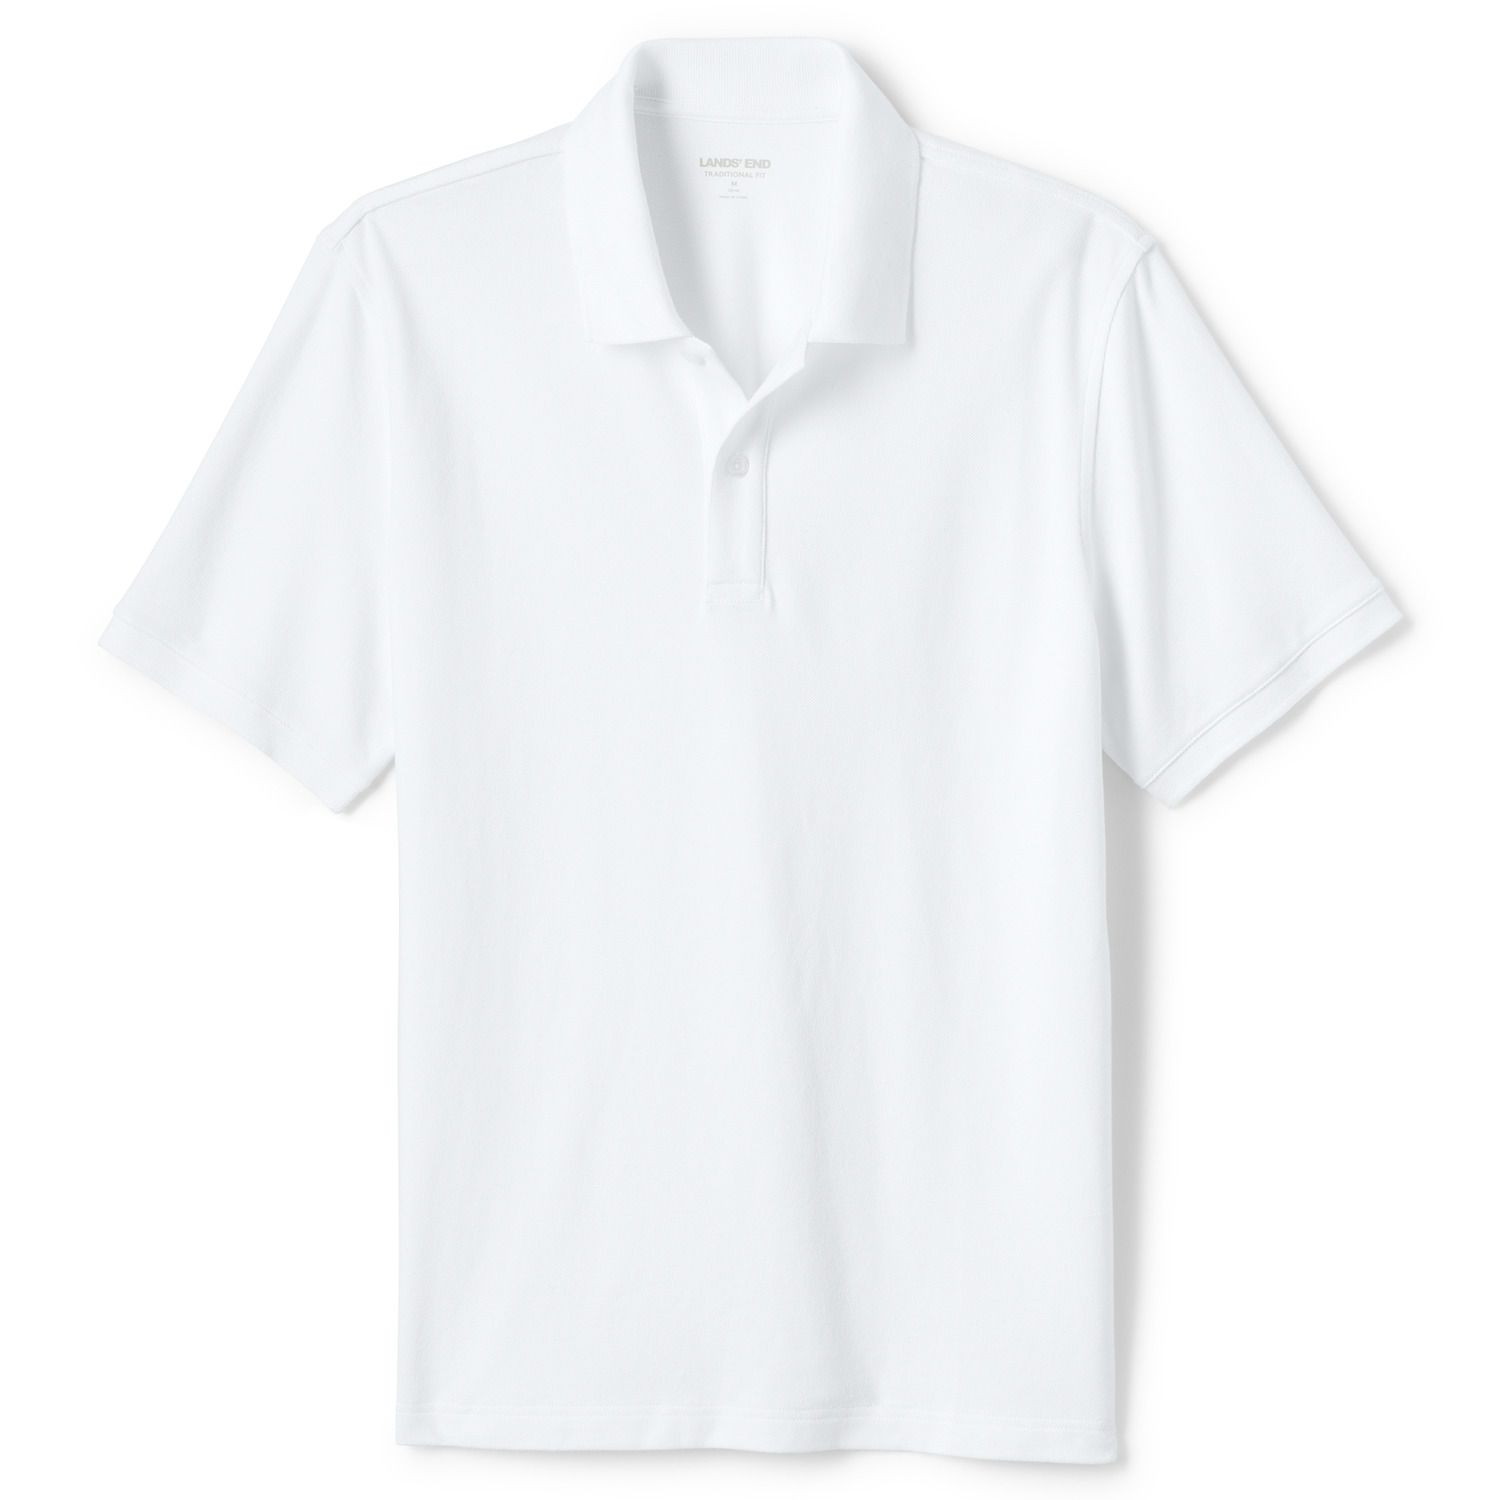 Image for Lands' End Men's Tailored-Fit Comfort-First Mesh Polo at Kohl's.